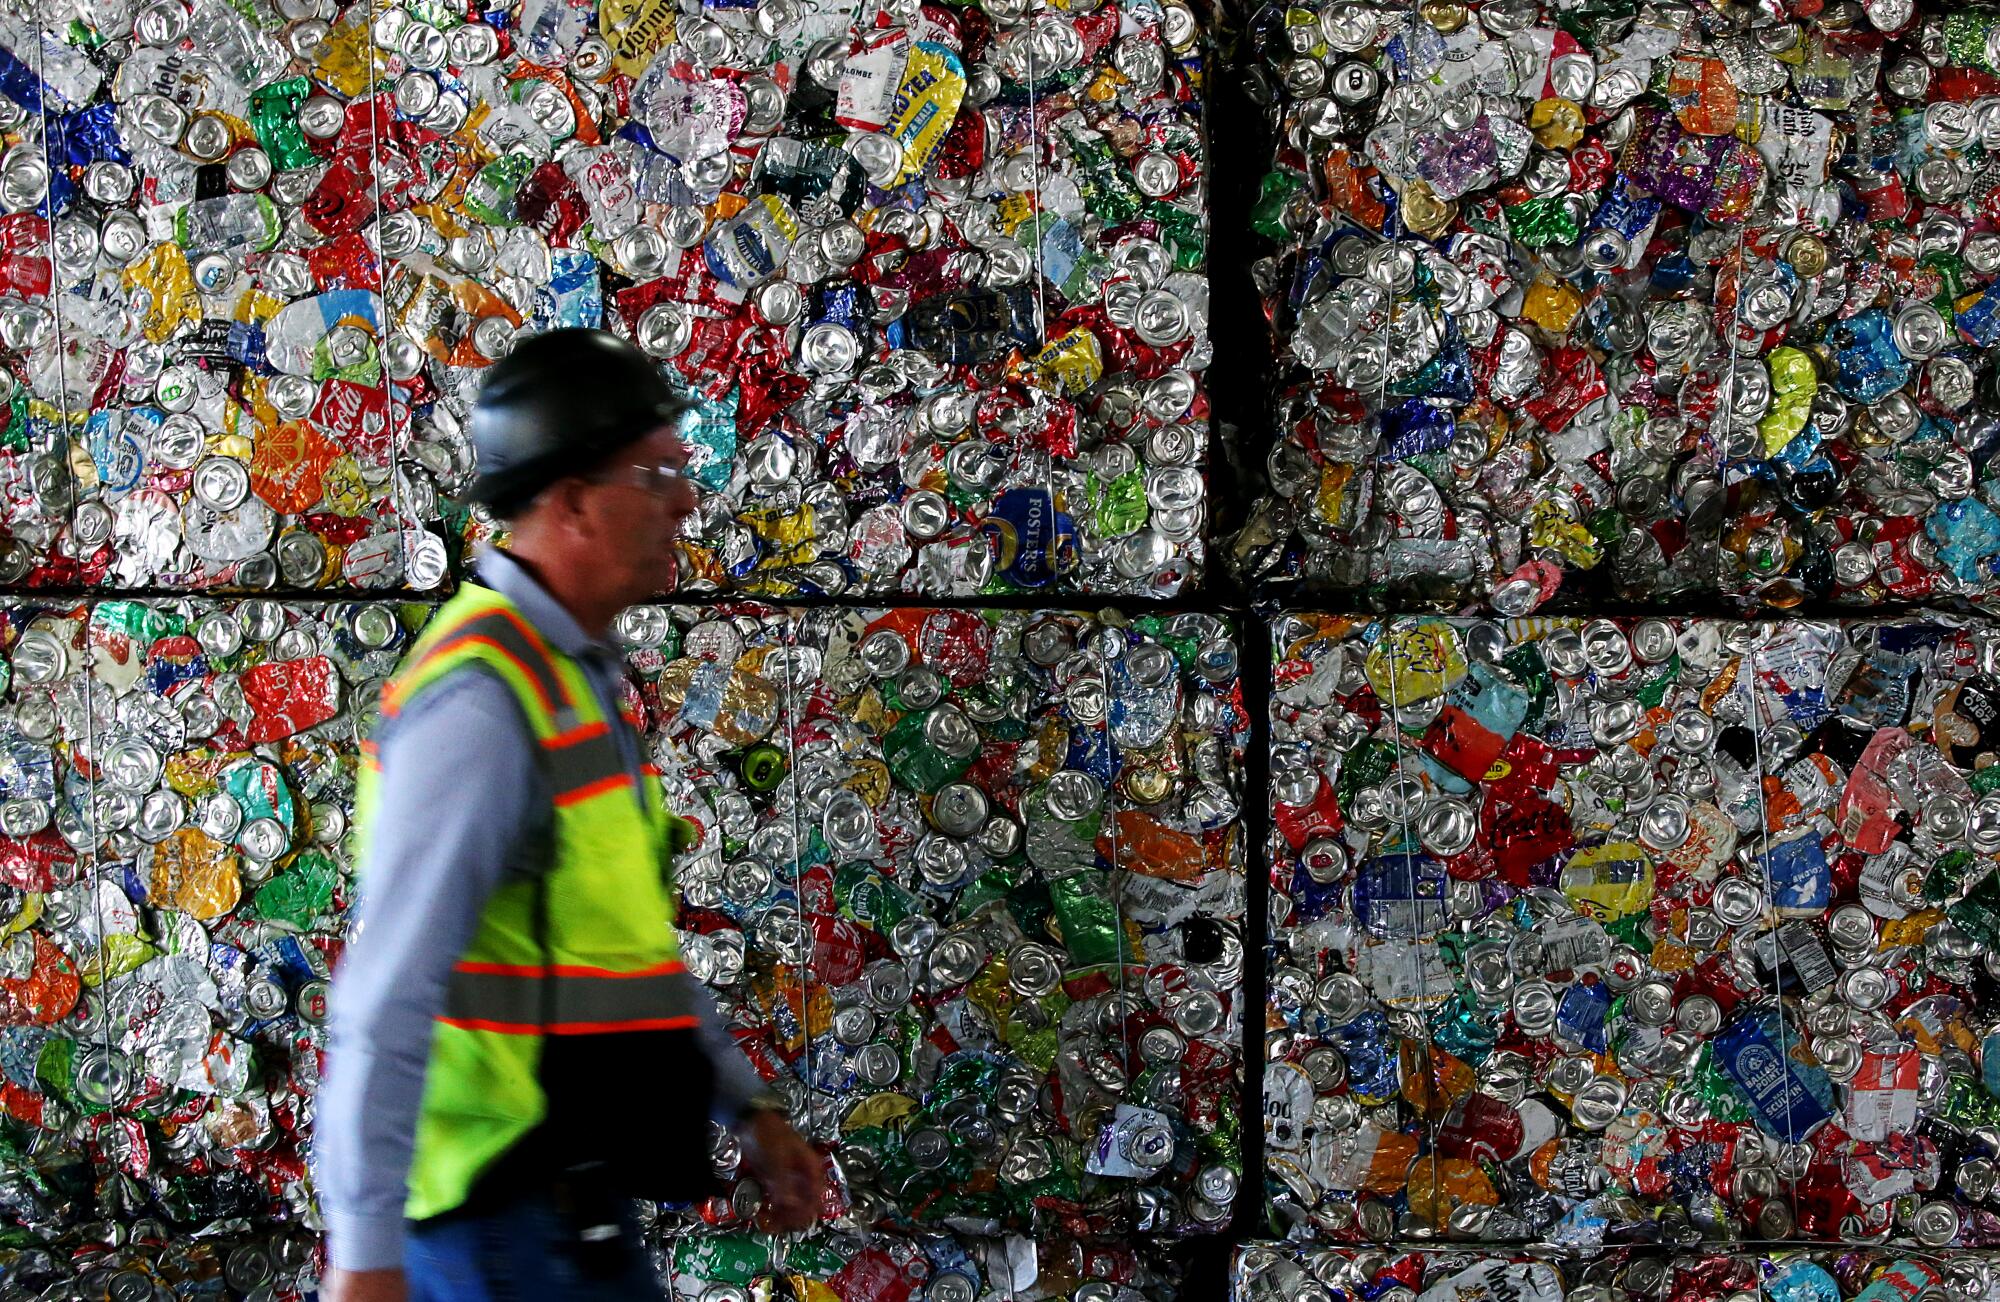 A worker walks past large blocks of crushed aluminum cans.